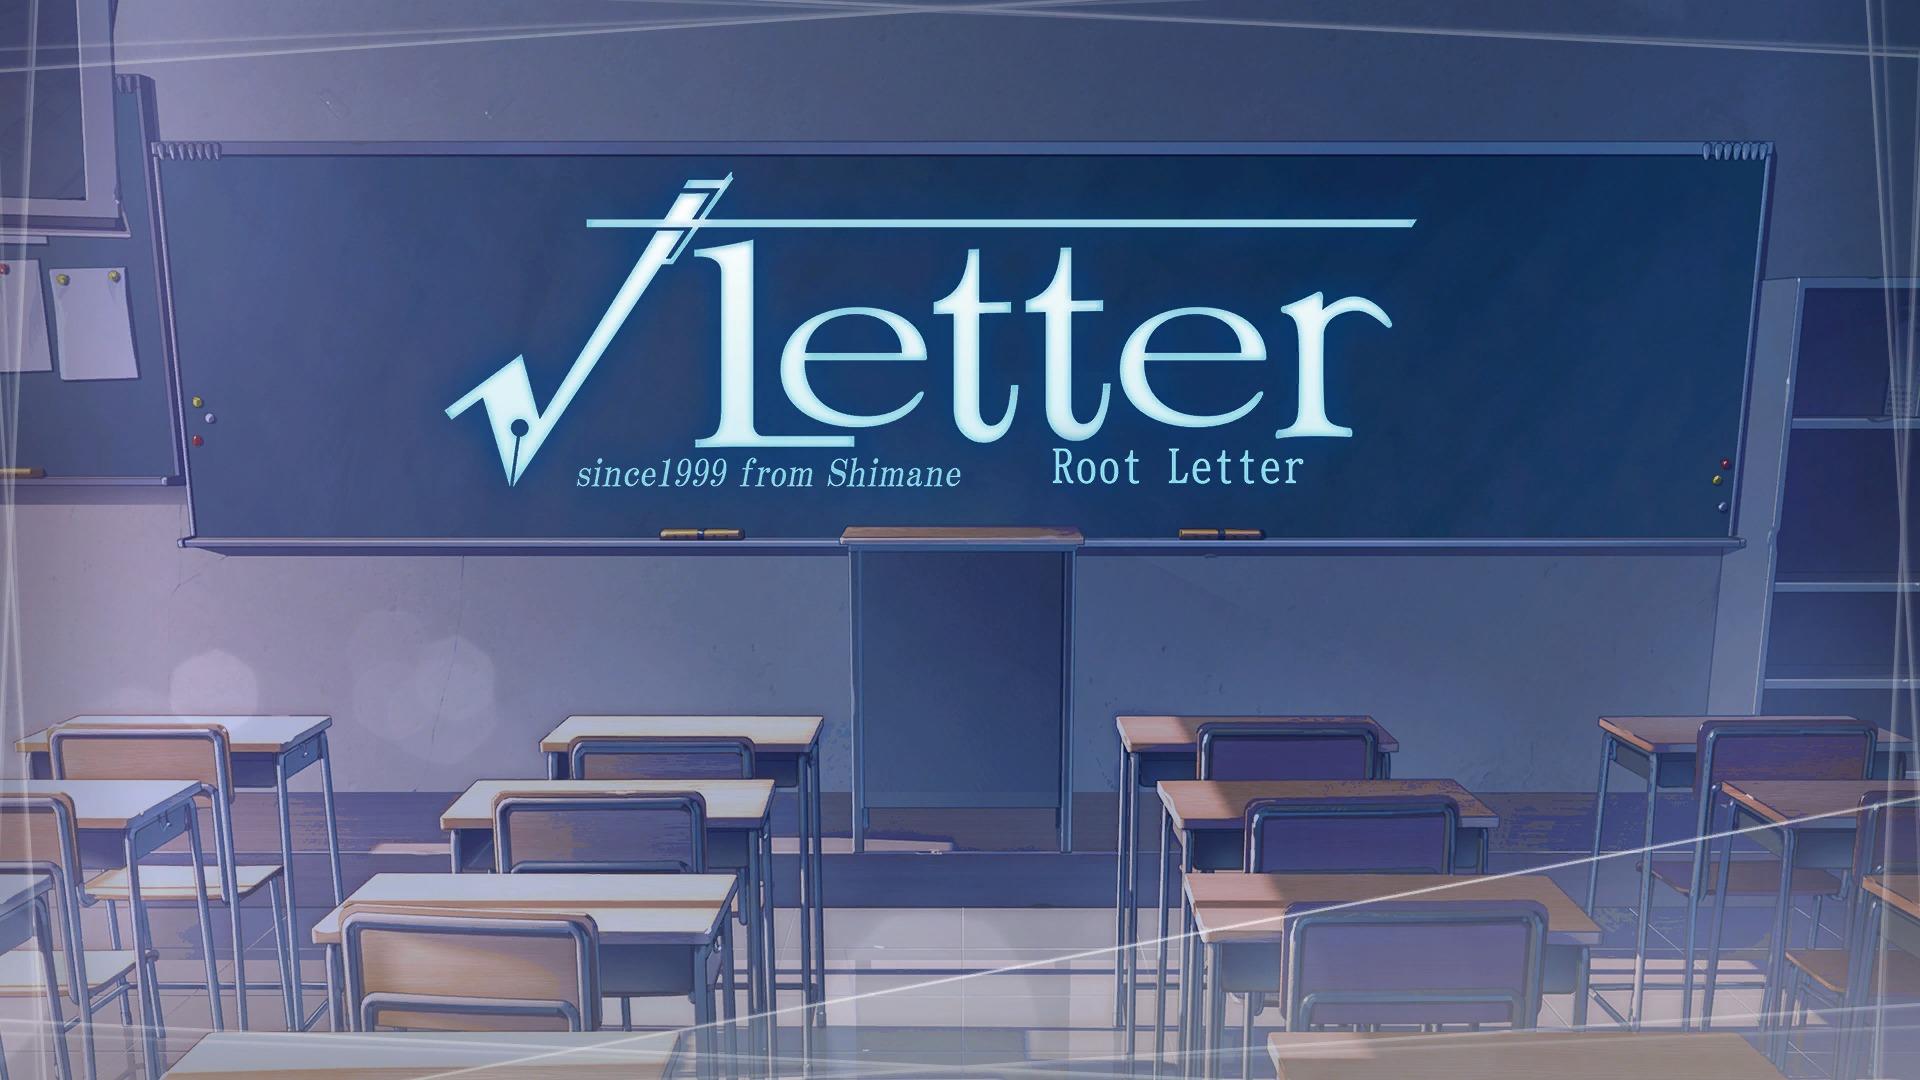 Root Letter Hd Wallpaper Hd - Root Letter , HD Wallpaper & Backgrounds